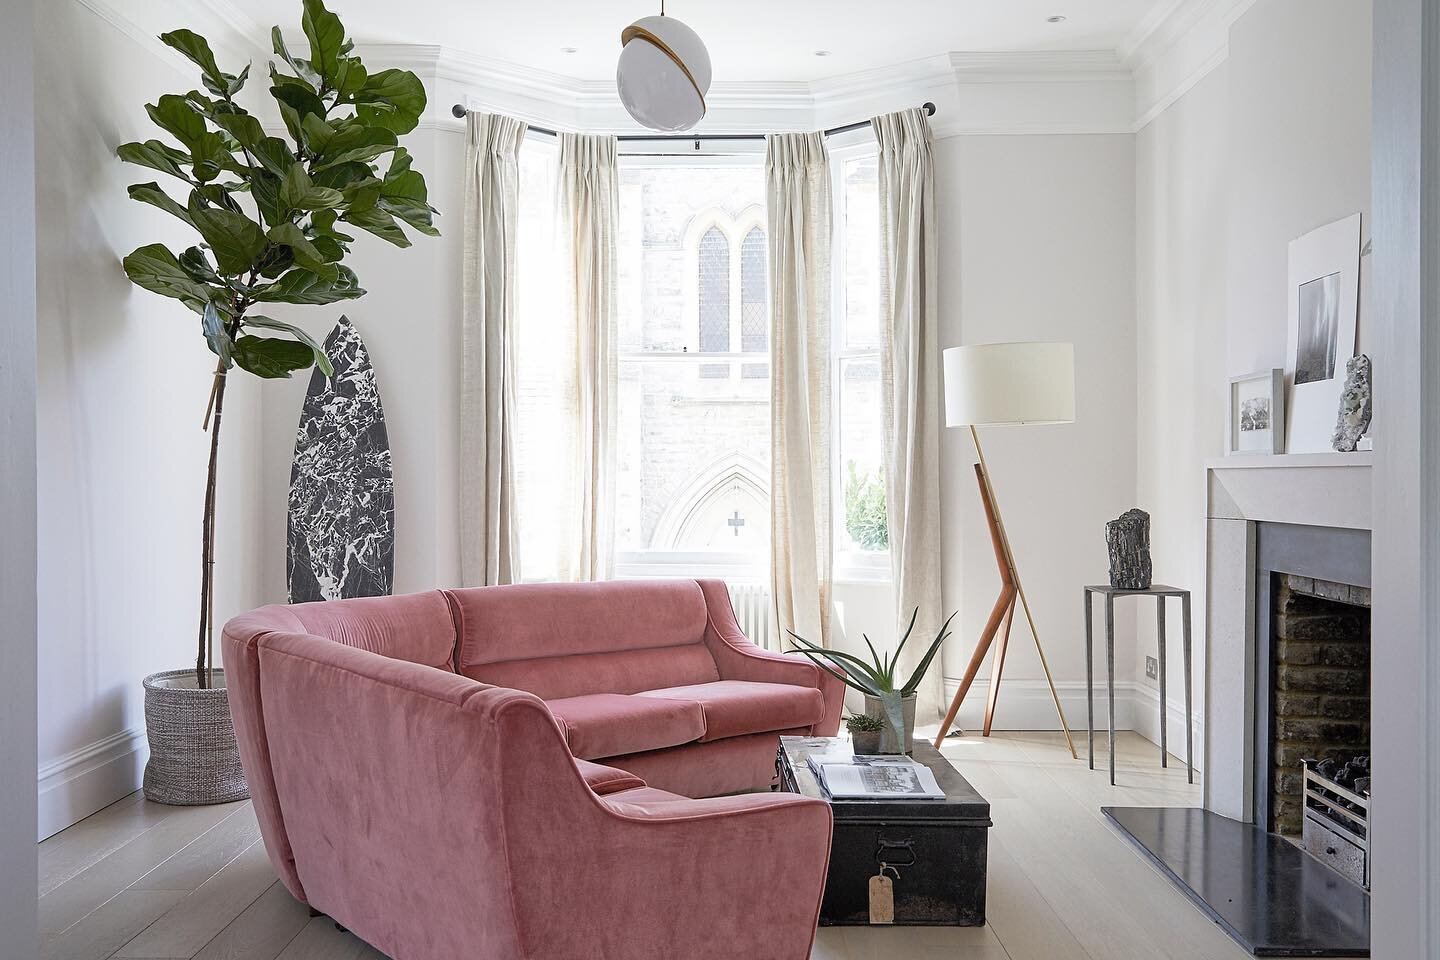 PINK&hellip;there can never be enough! In one of our west london apartments 💗
.
.
#pinkpinkpink #property #londoninteriordesigner #decor #marblesurfboard #marble #bespokedesign #indoorplants #church #architect #interiorarchitect #crystals #art #desi